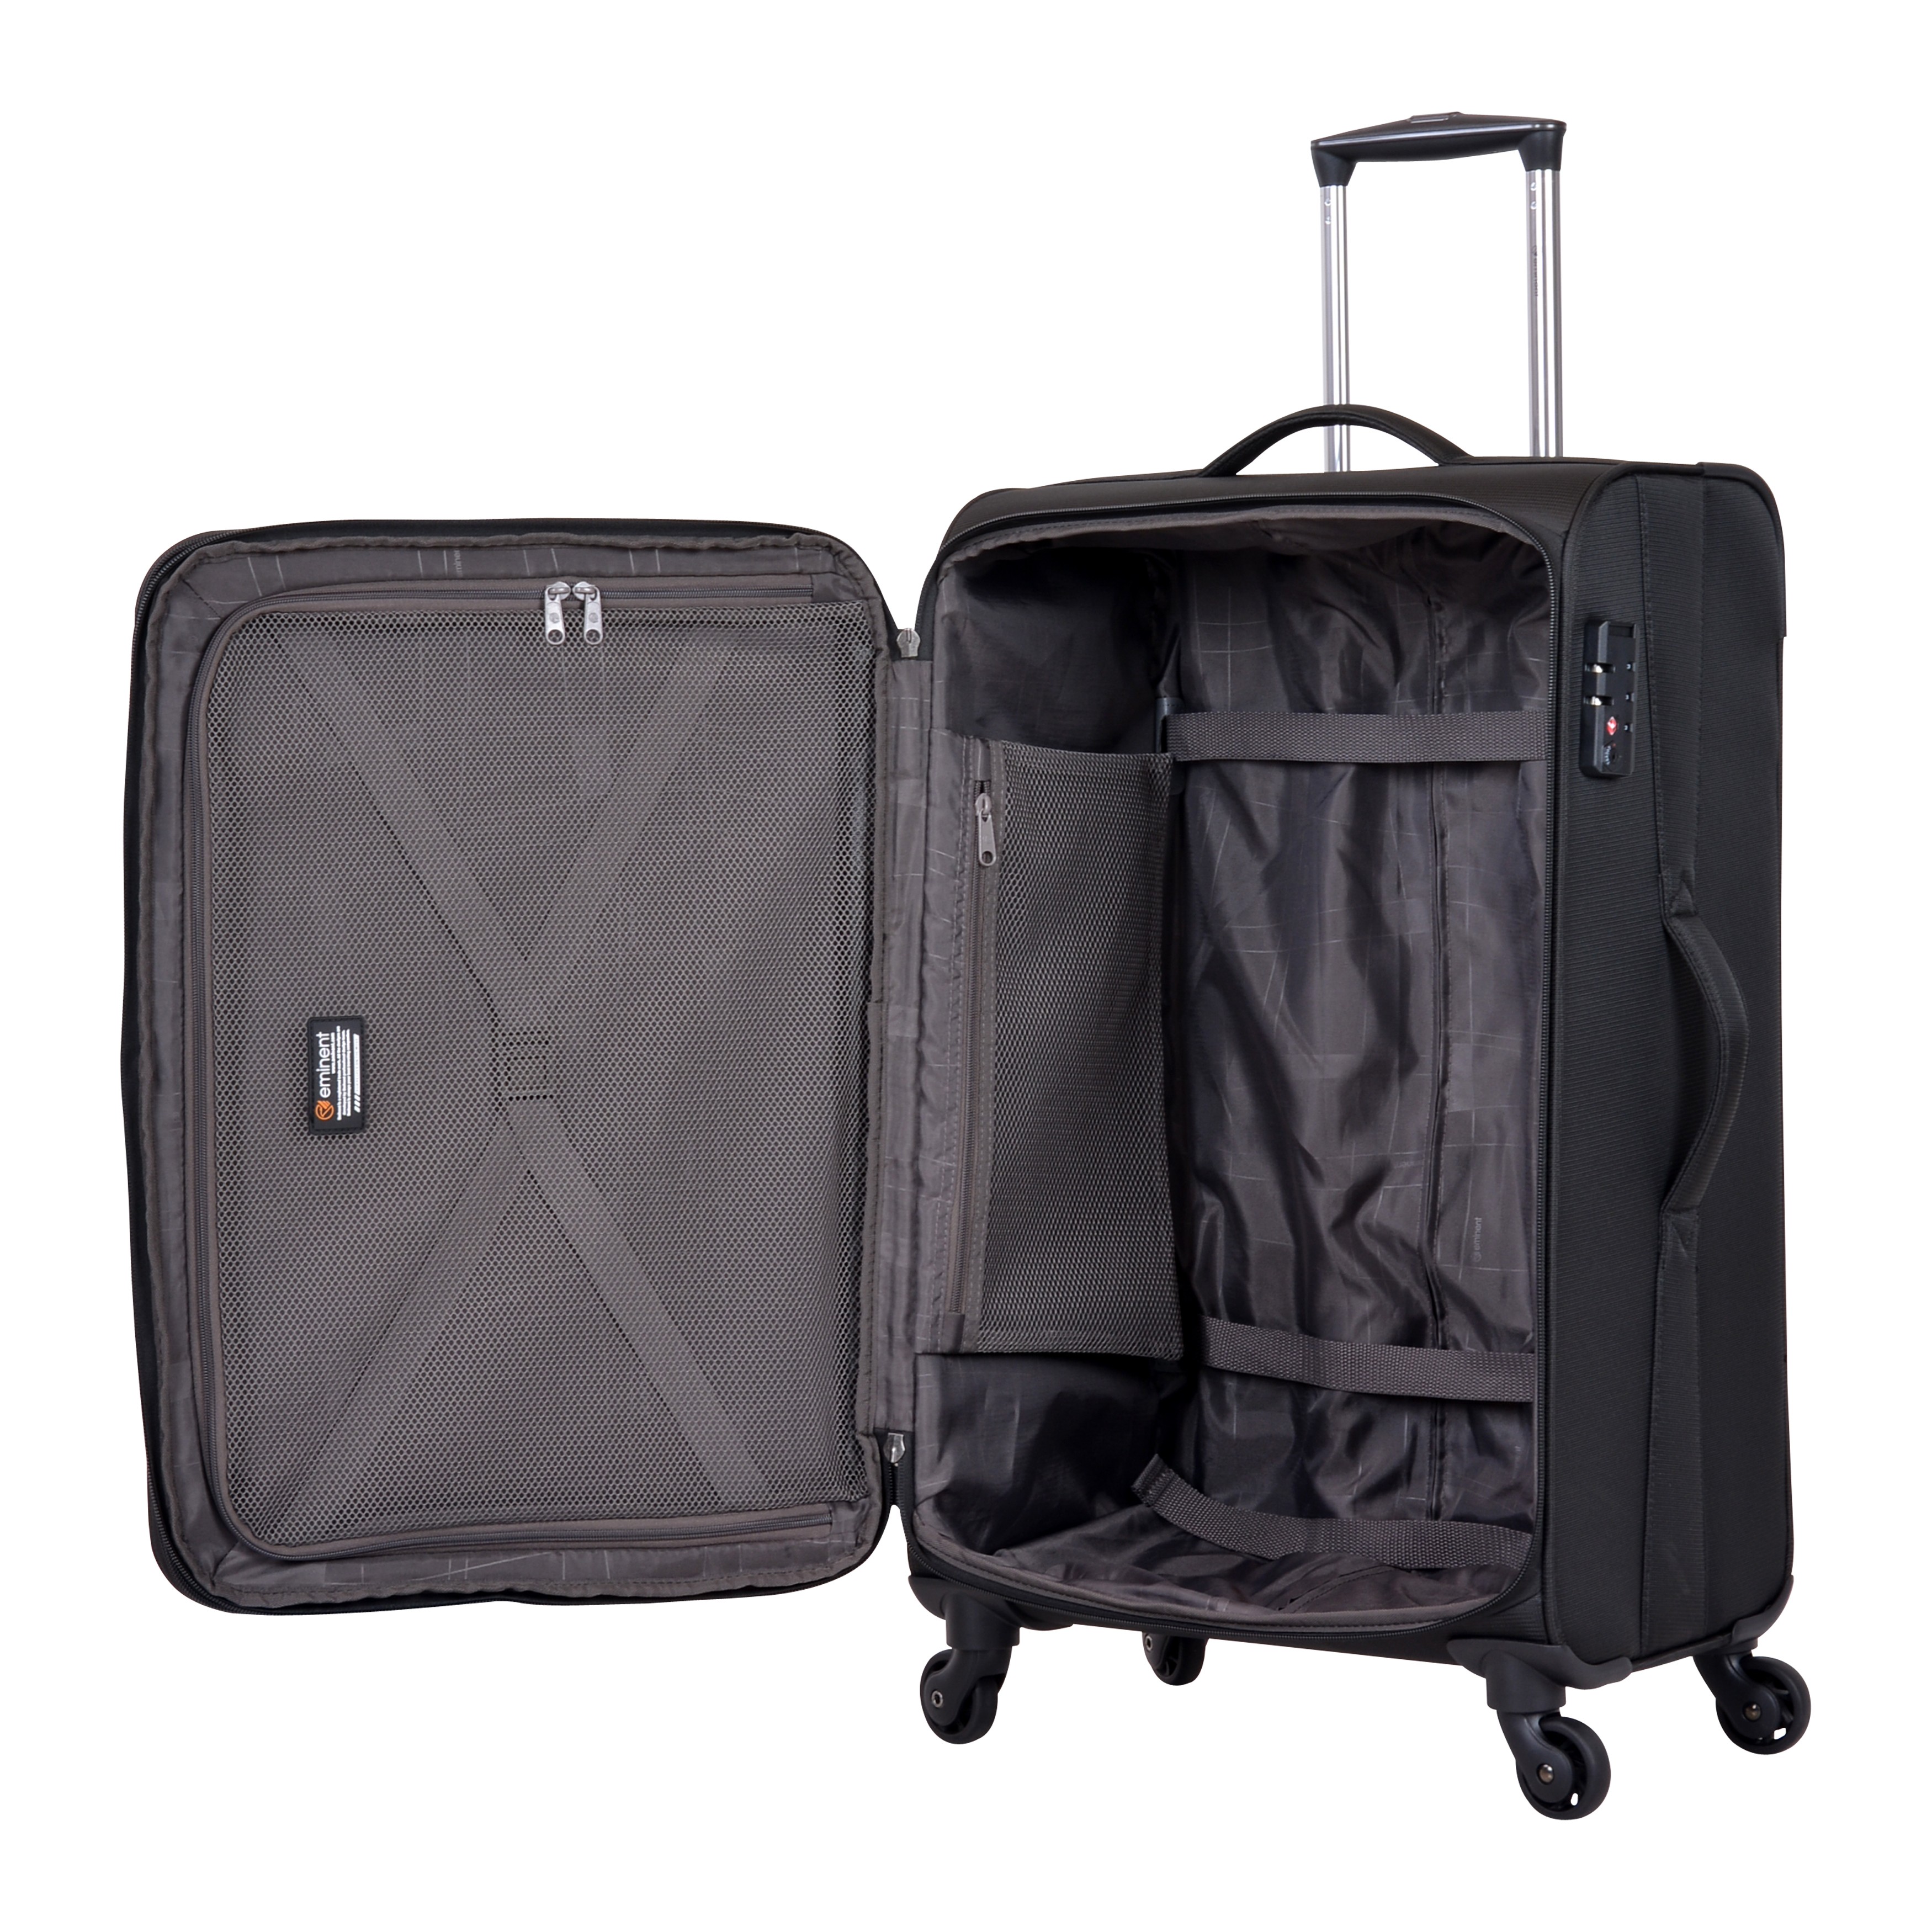 Eminent 4 Wheel Soft Casing Expandable Recycled Large Luggage Trolley 71cm&nbsp;Black V6101